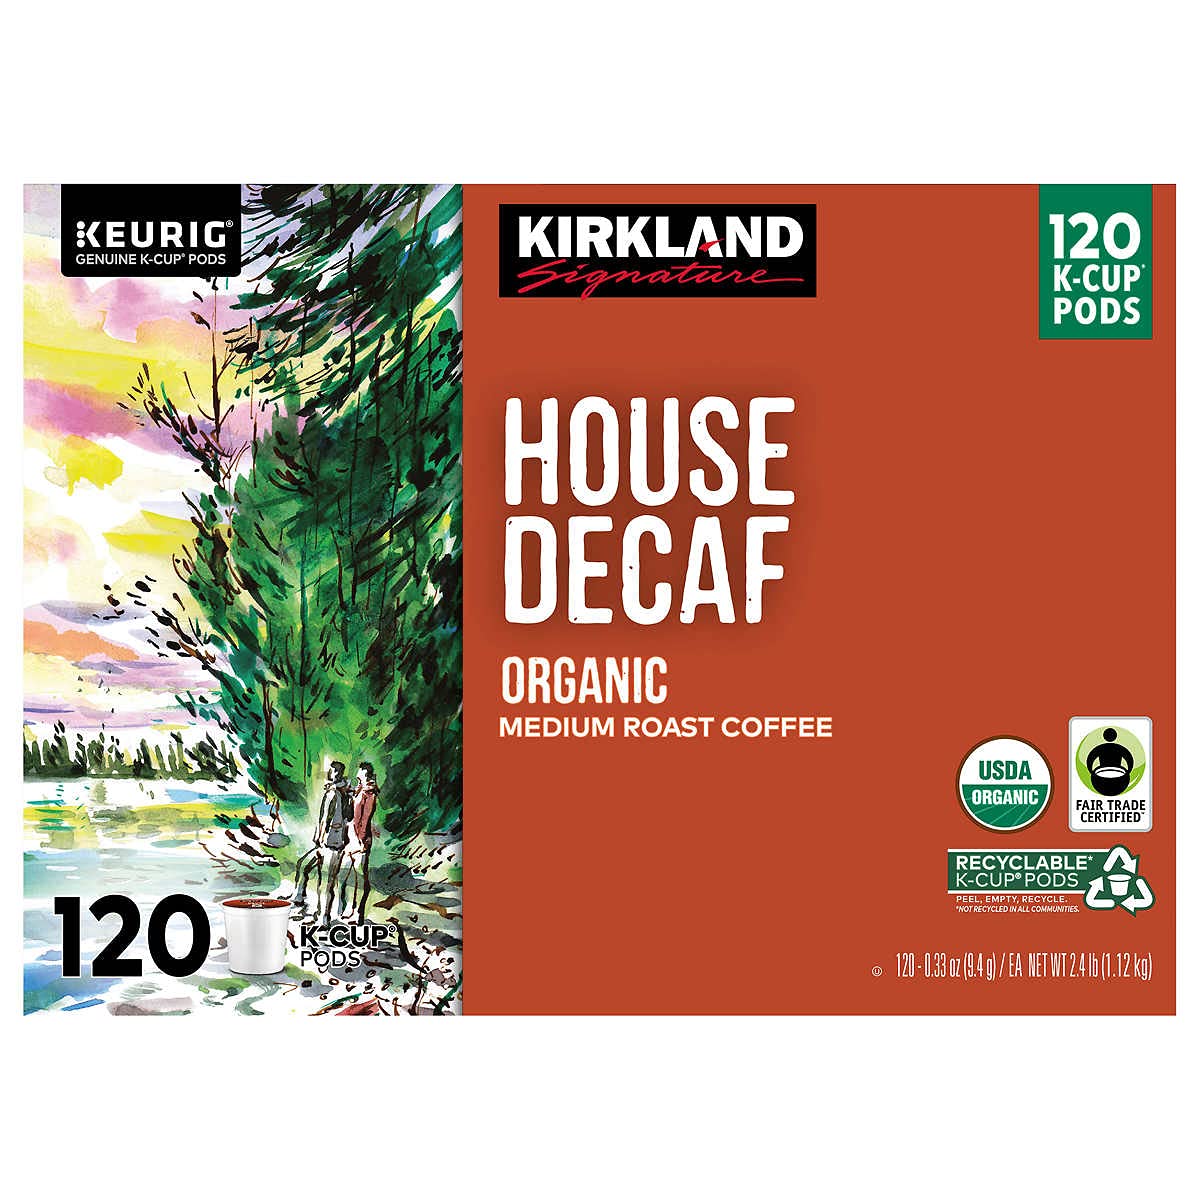 Kirkland Signature Organic House Decaf Coffee K-Cups, 120 Count, 120 Count (Pack of 1)